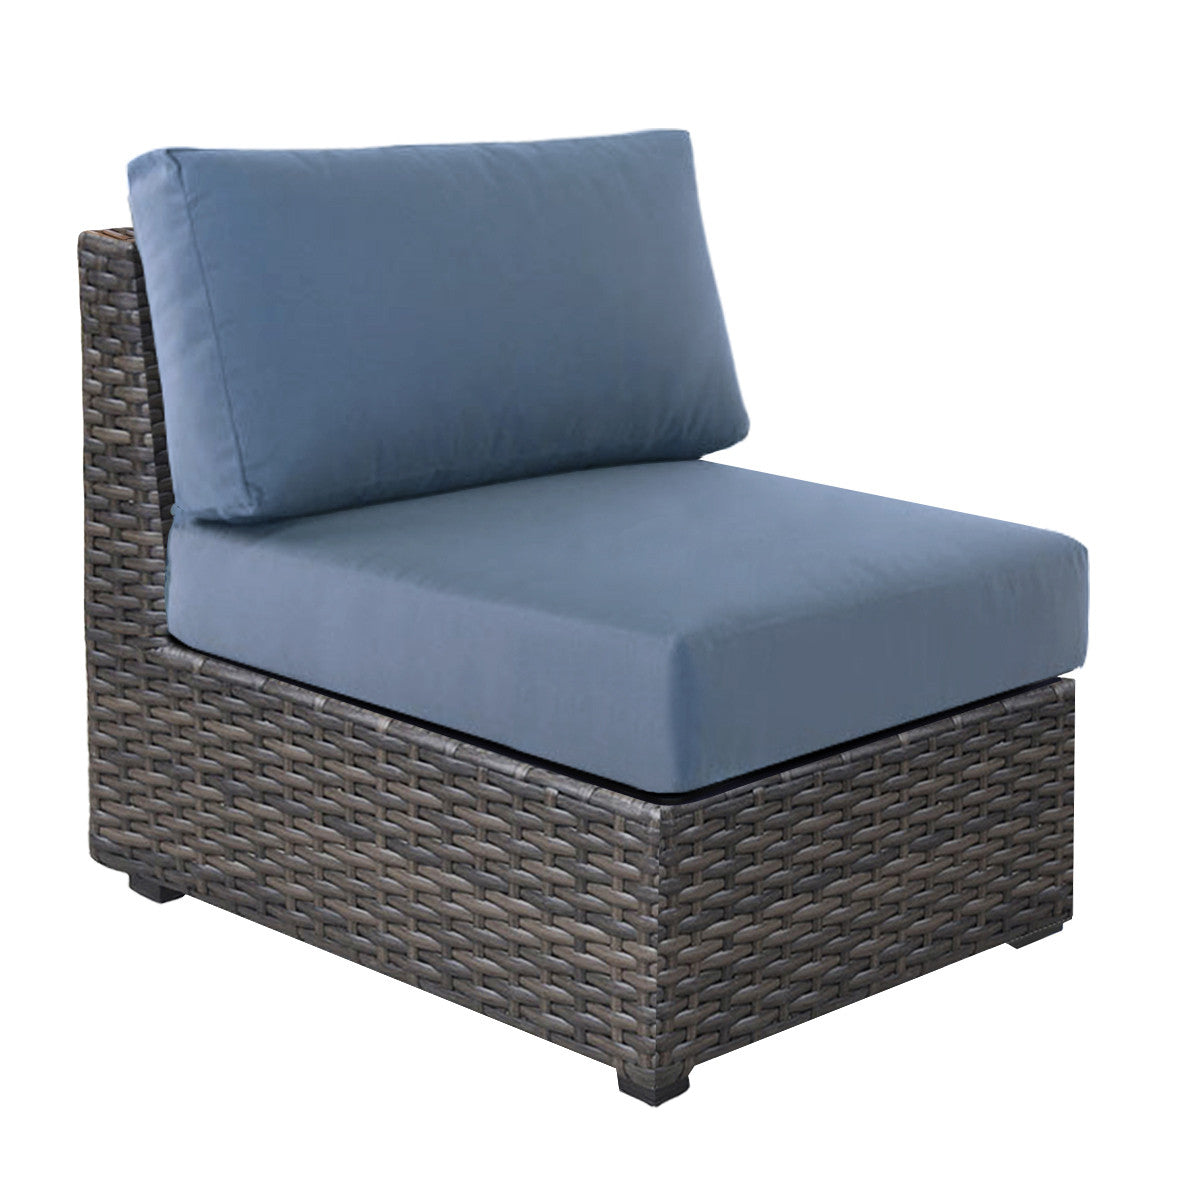 Forever Patio Horizon Wicker Sectional Armless Middle Chair